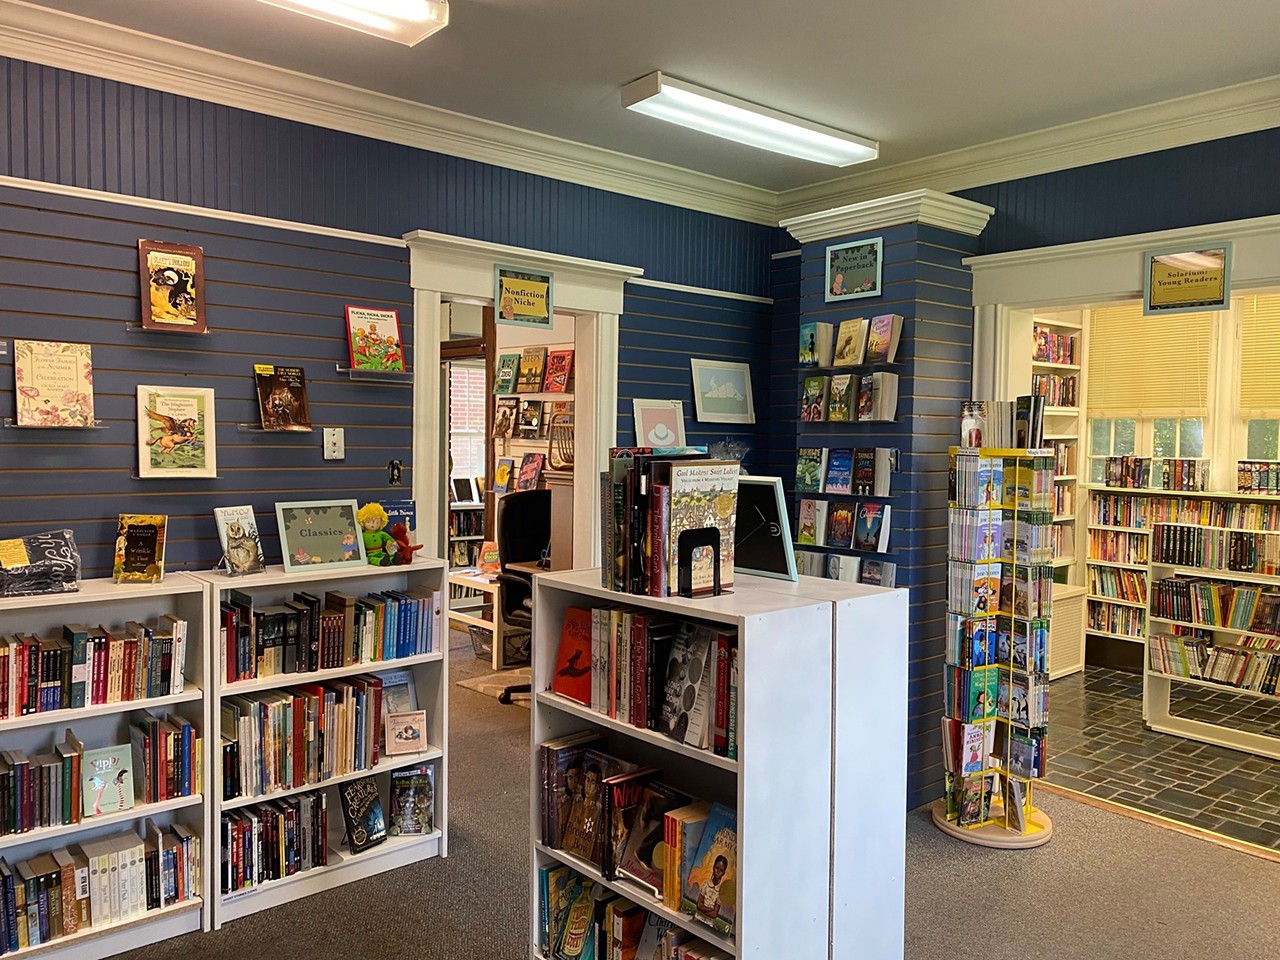 No. 10 Best Bookstore: Blue Marble Books
1356 S Fort Thomas Ave., Fort Thomas